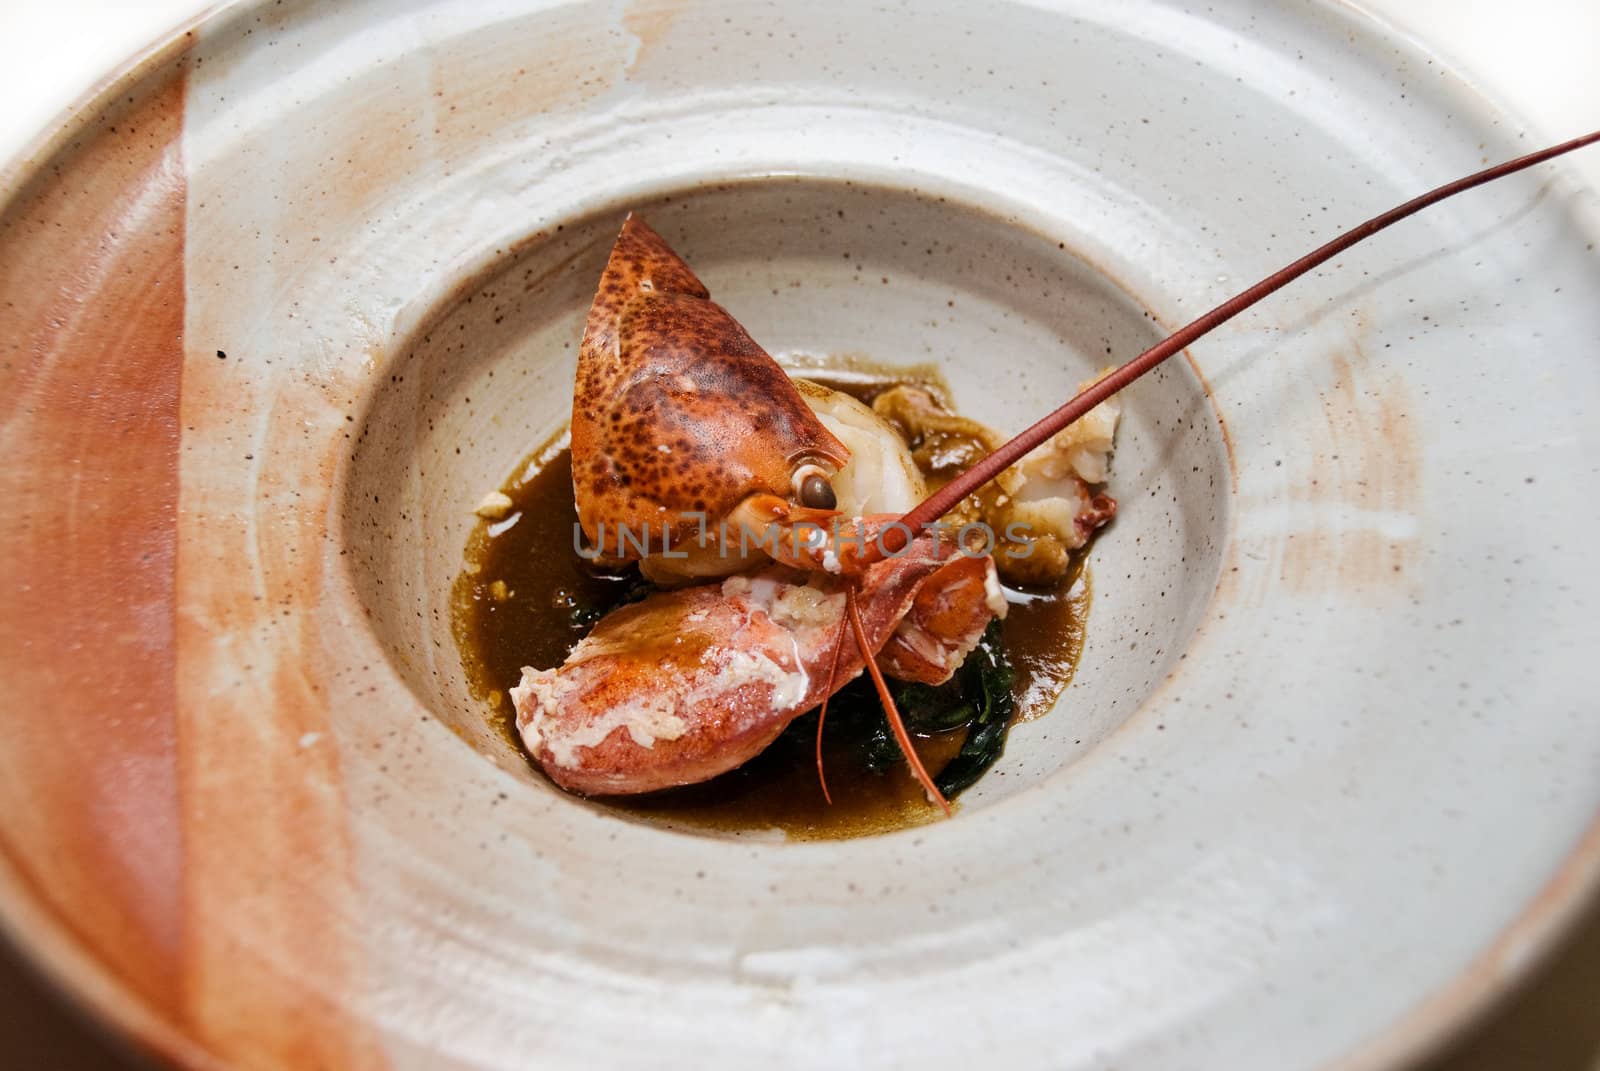 Lobster Bisque is a delicious soup starter.